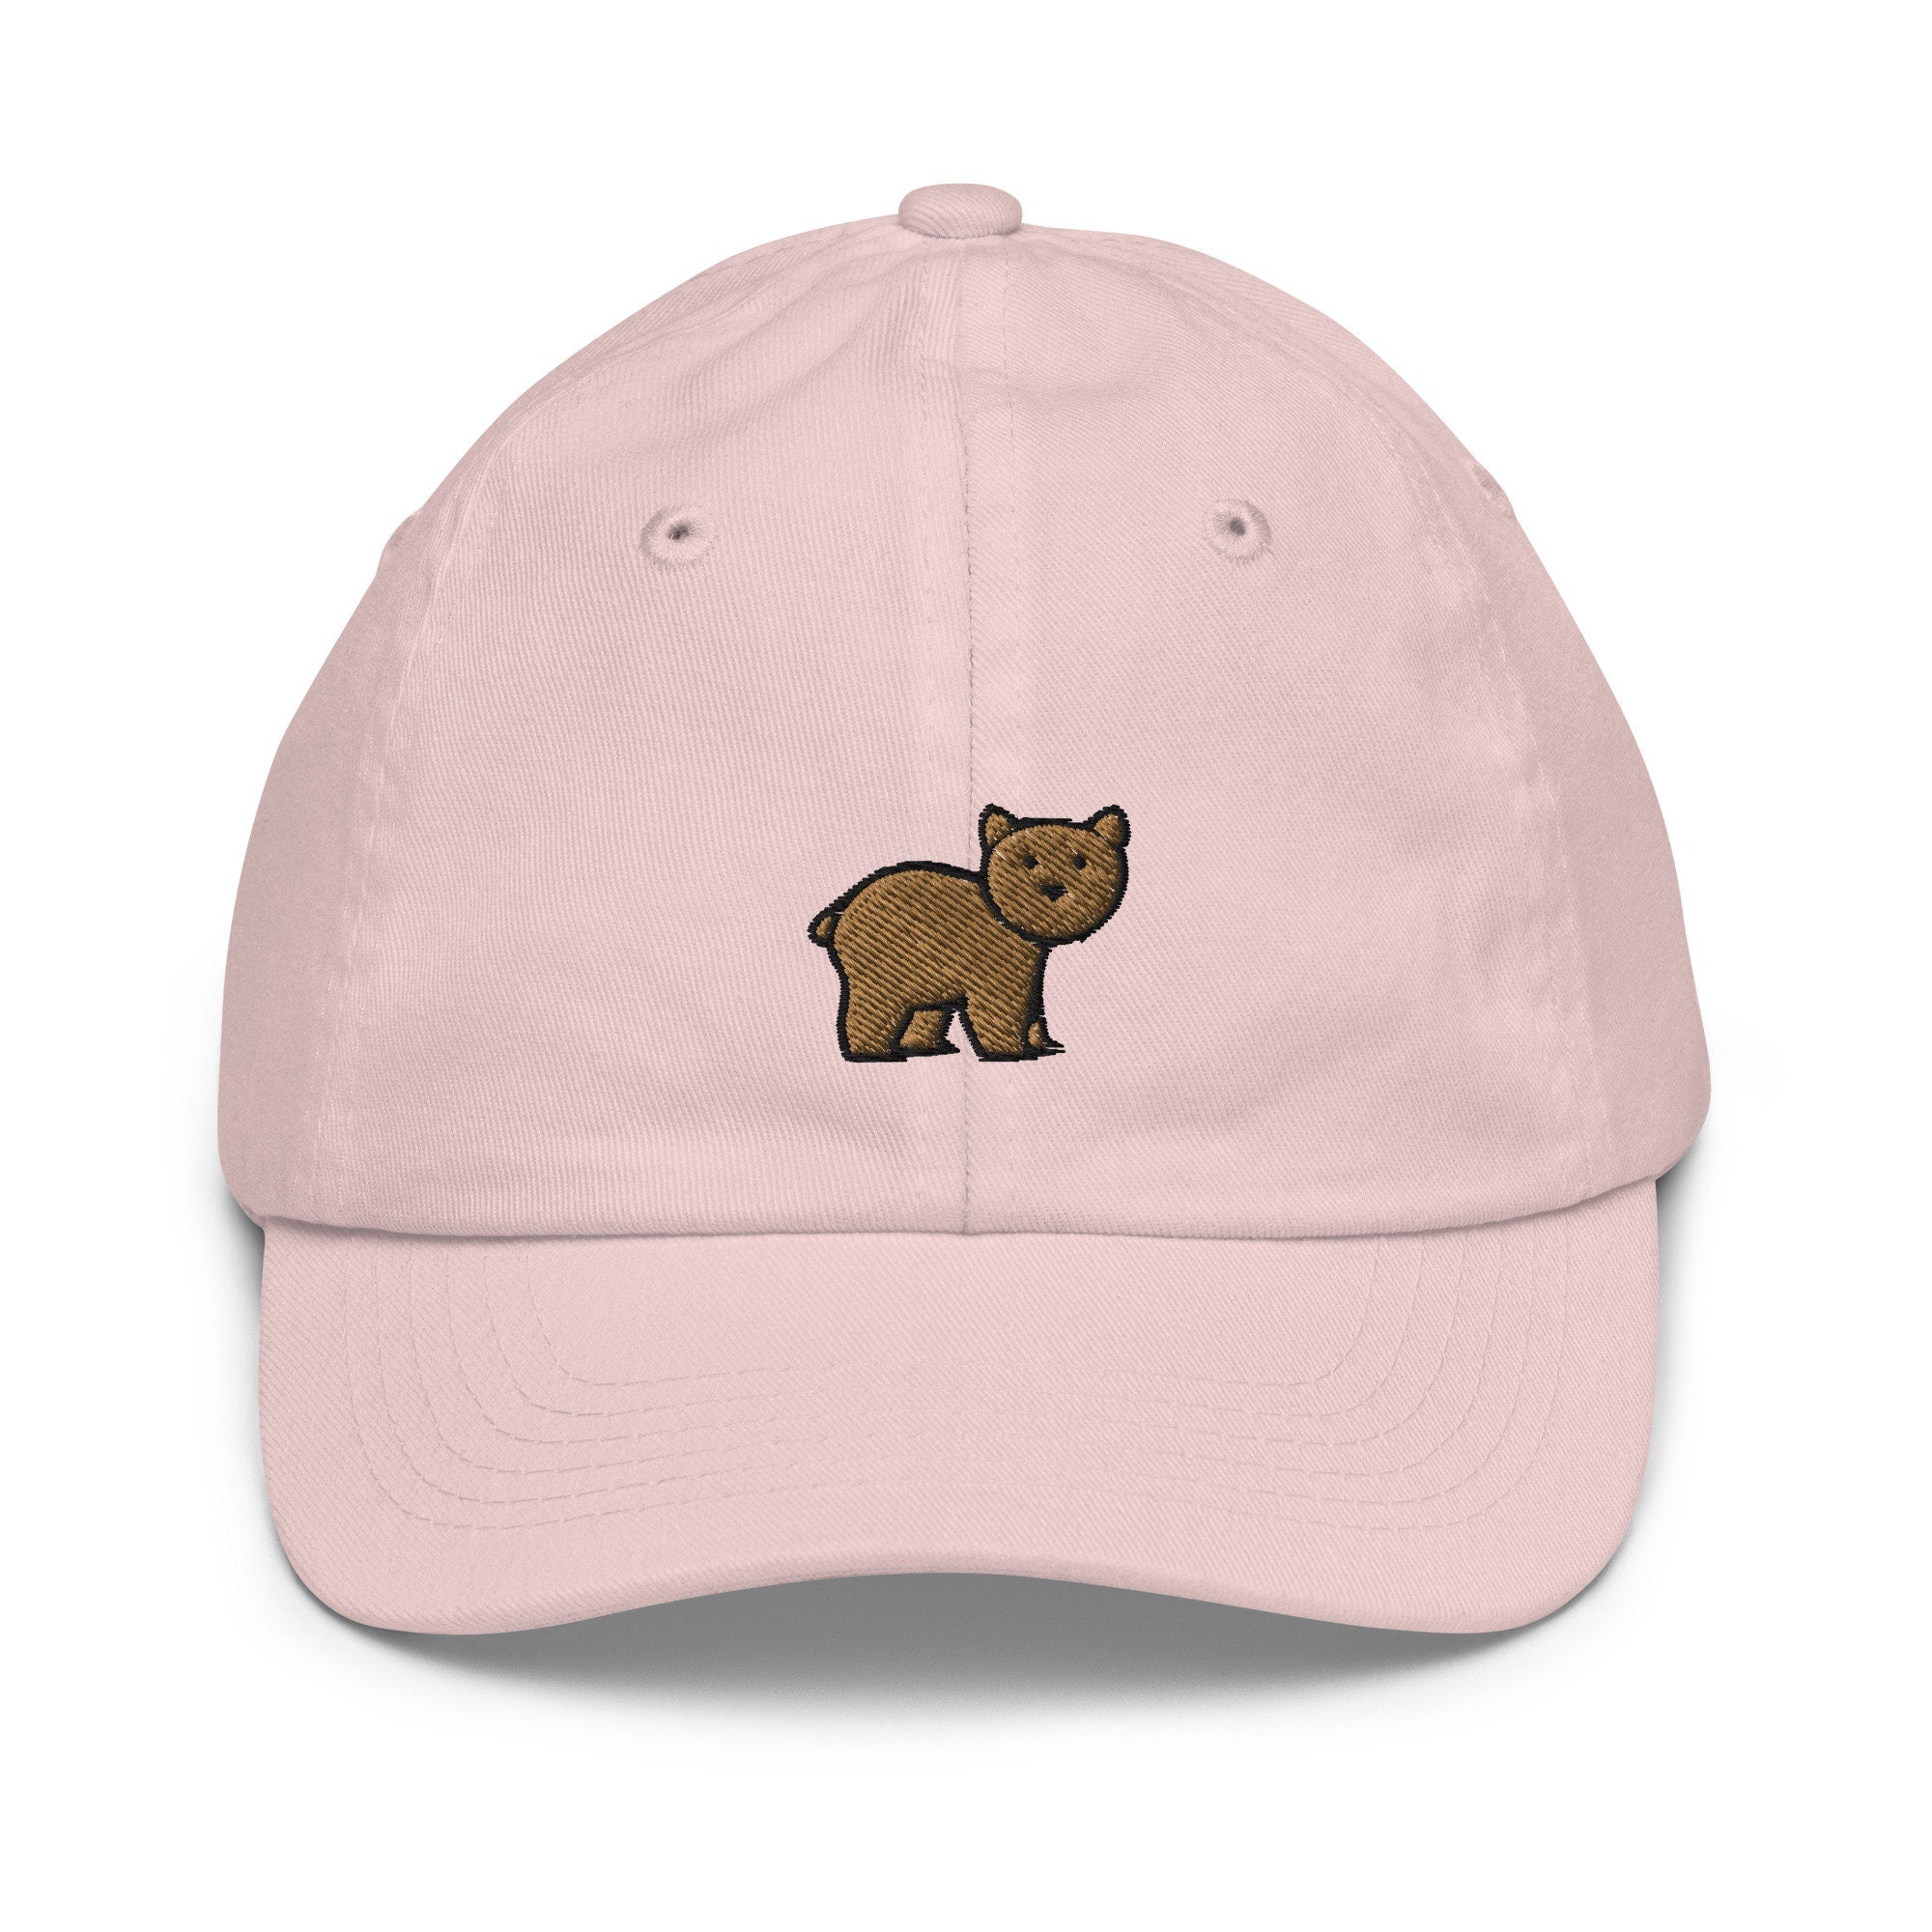 Bear Youth Baseball Cap, Handmade Kids Hat, Embroidered Childrens Hat Gift - Multiple Colors